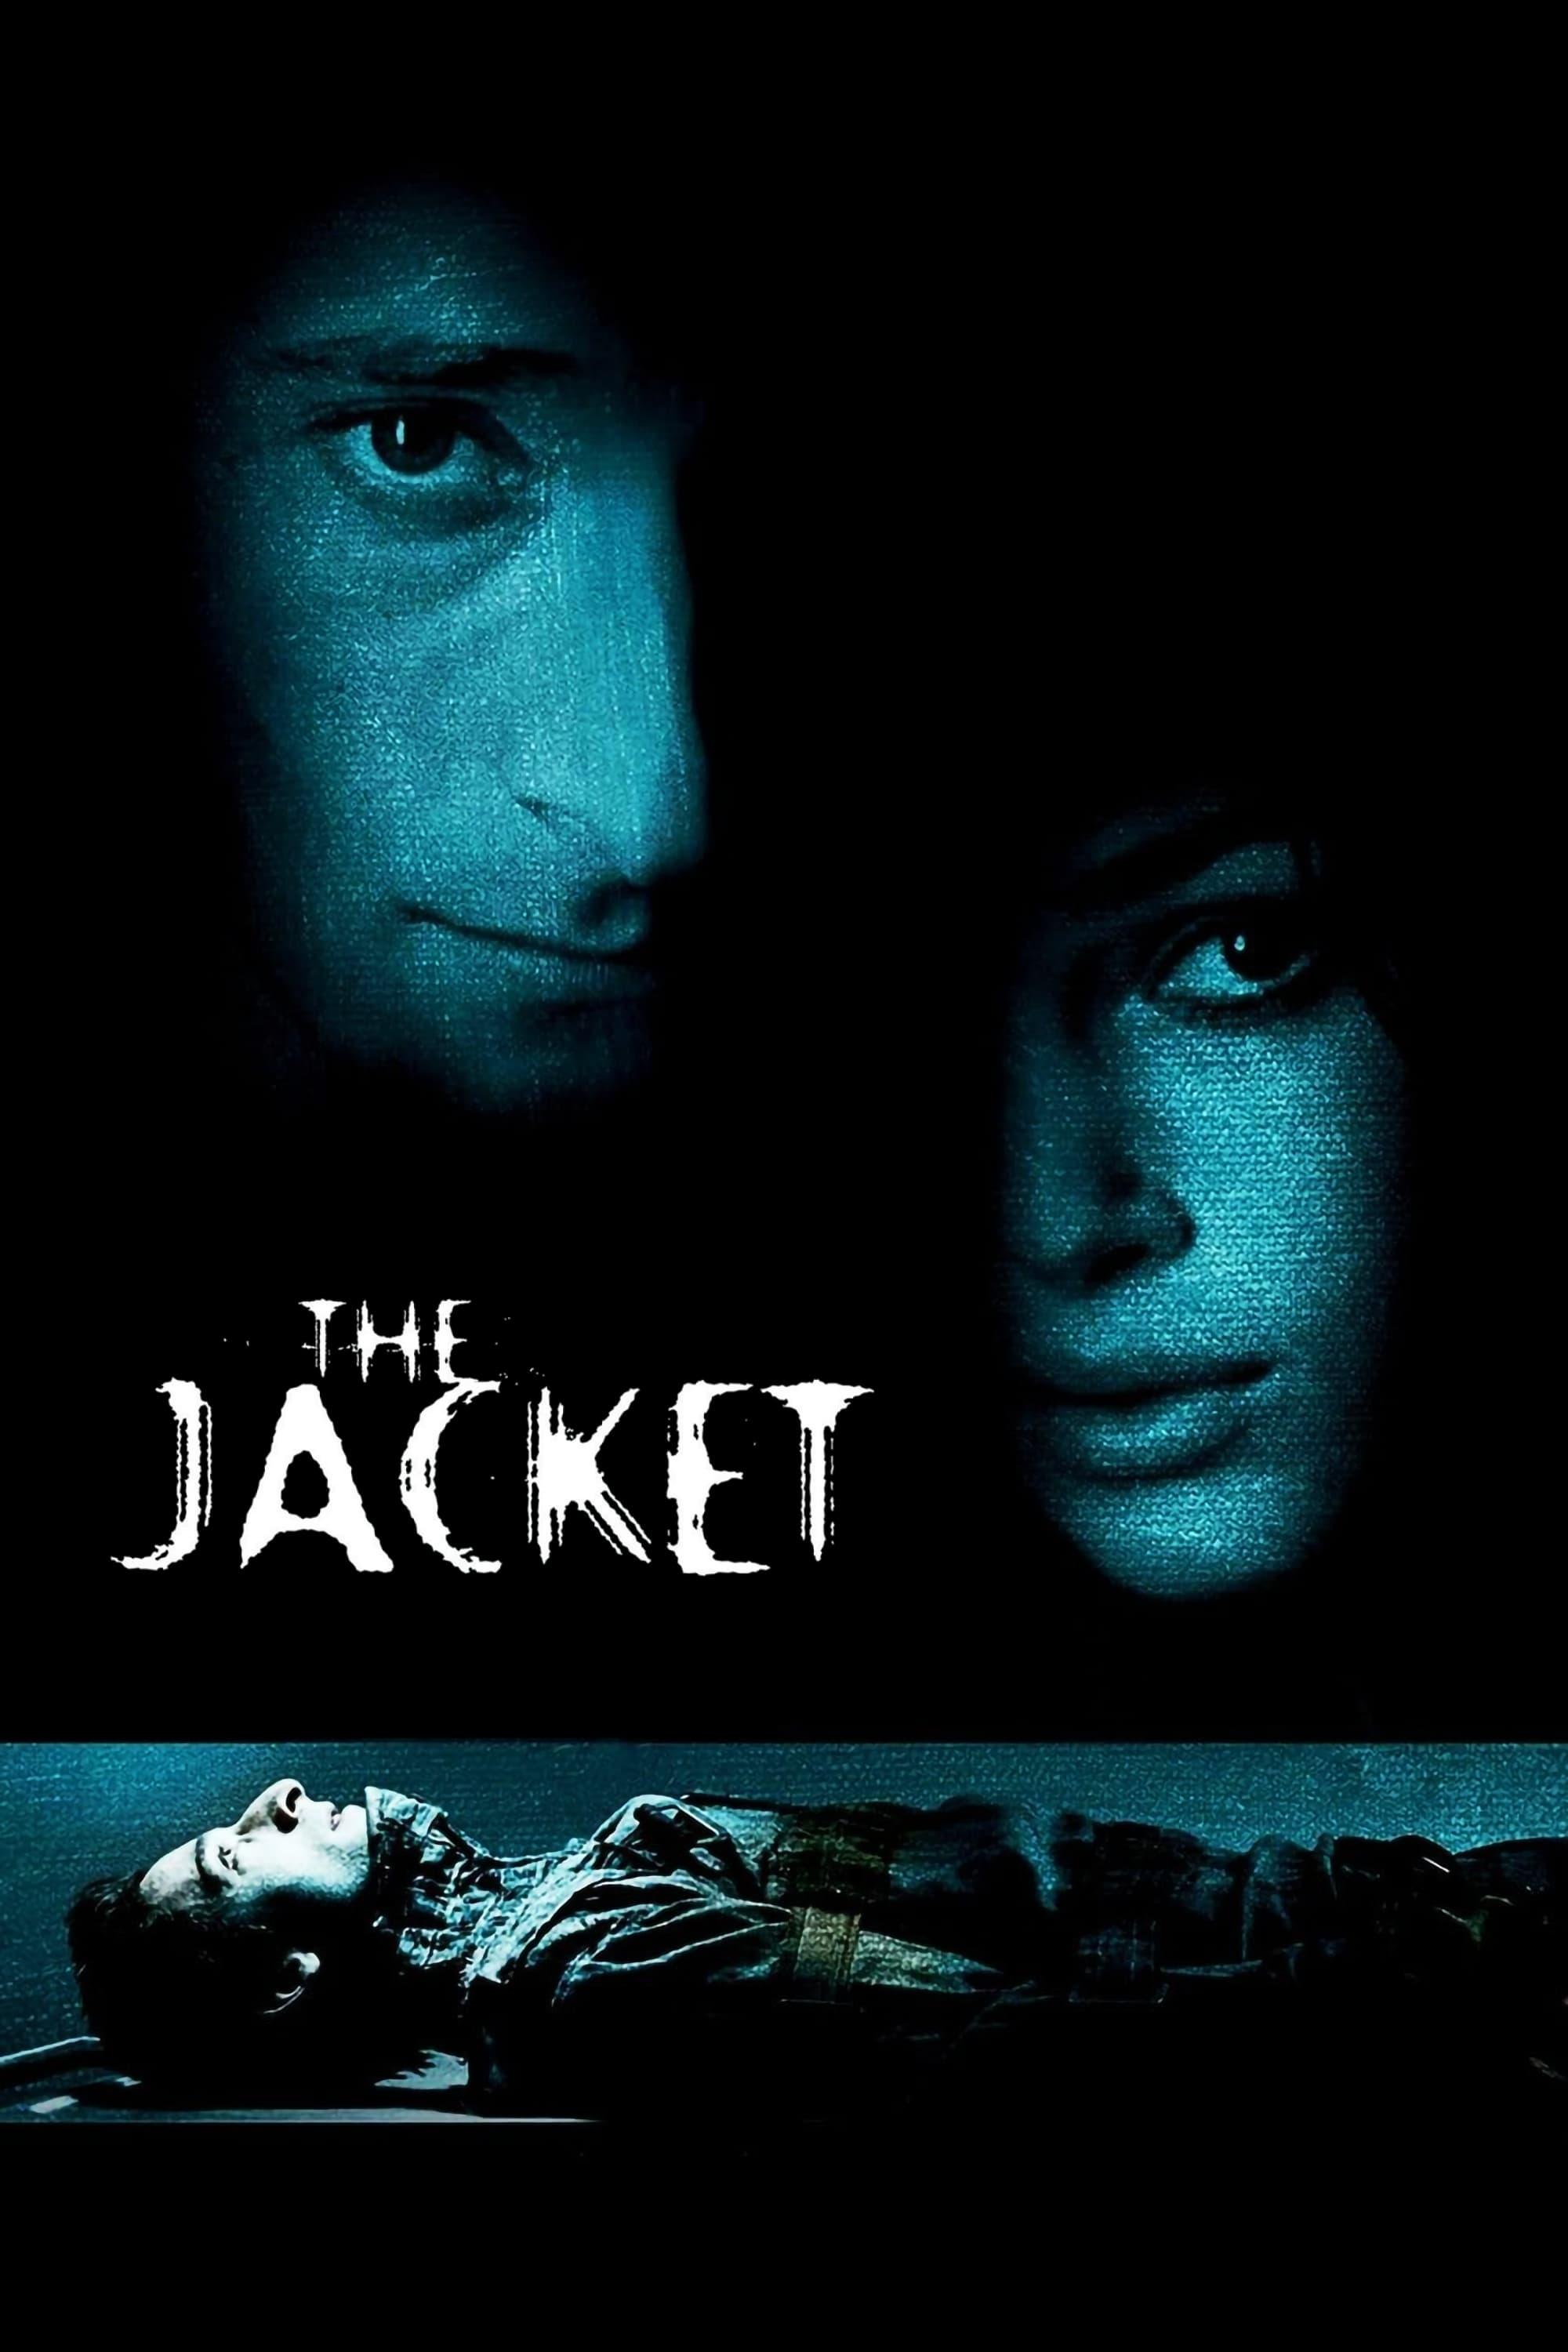 The Jacket poster